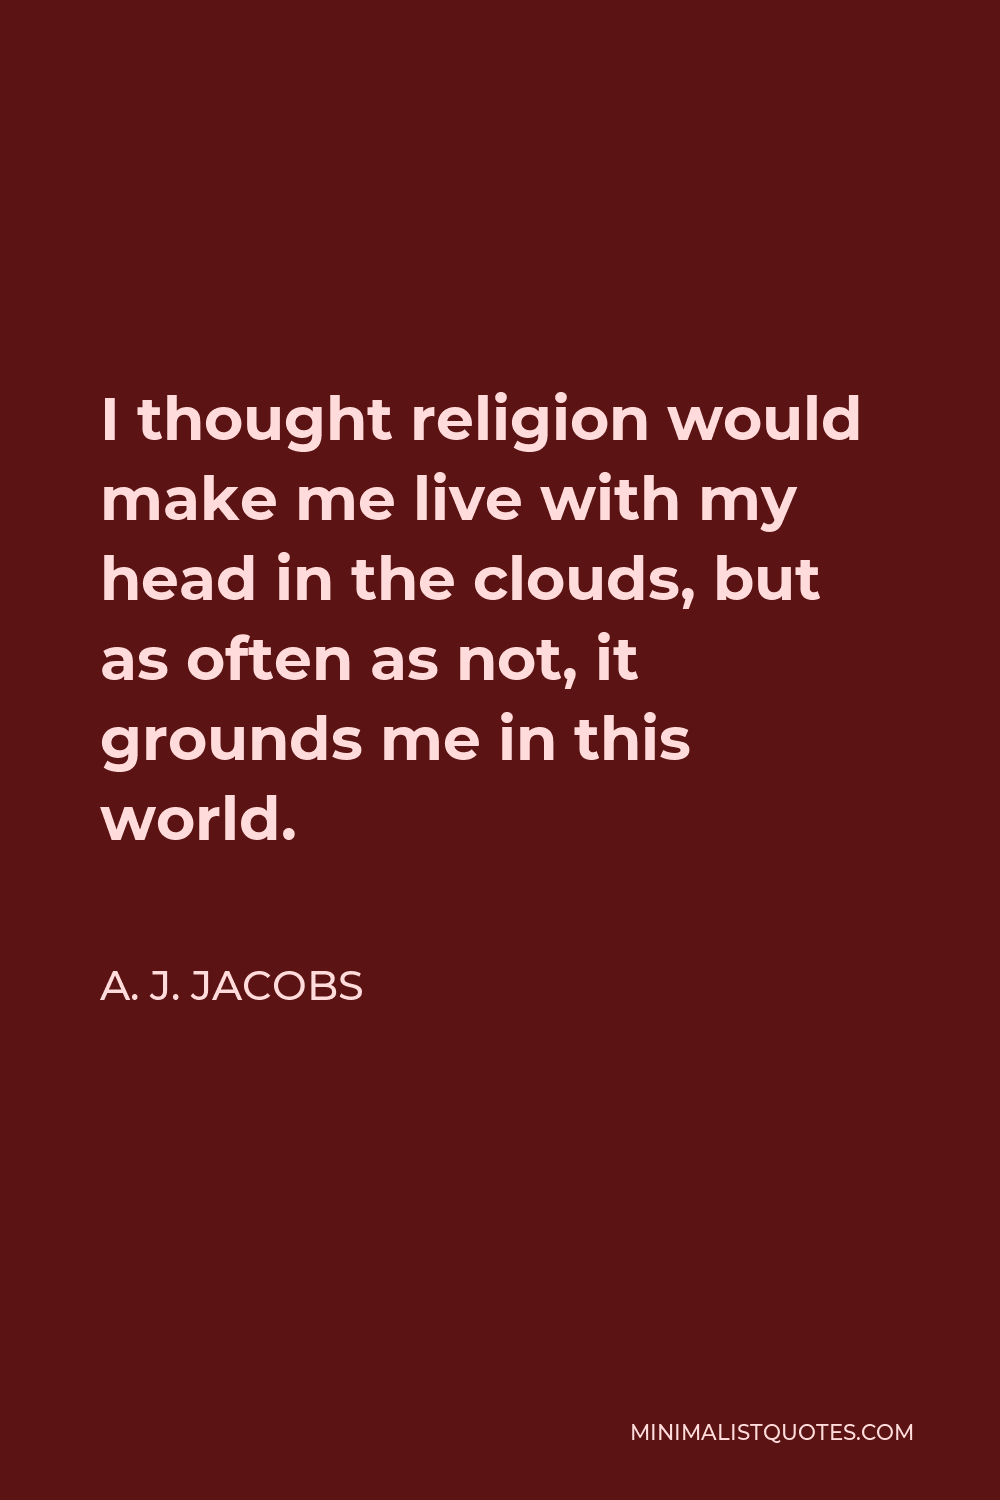 A. J. Jacobs Quote - I thought religion would make me live with my head in the clouds, but as often as not, it grounds me in this world.